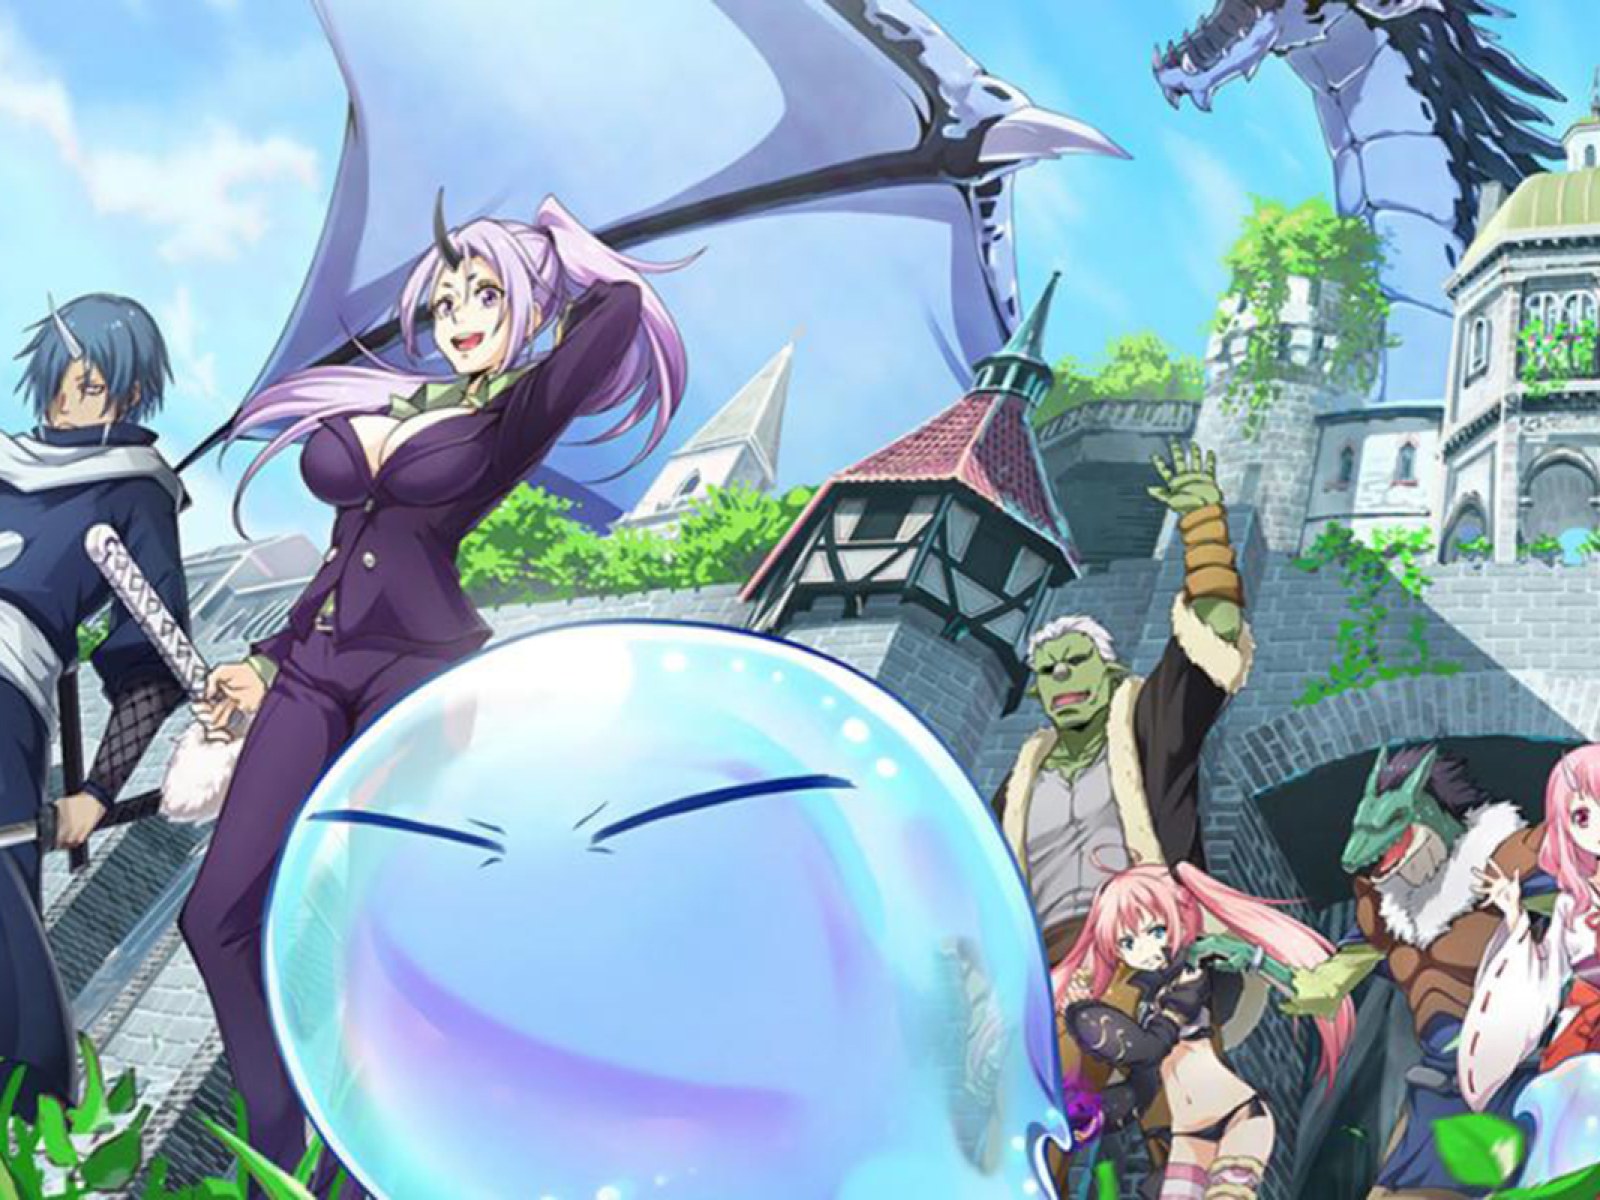 That Time I Got Reincarnated As A Slime' Season 2: How to Watch Online